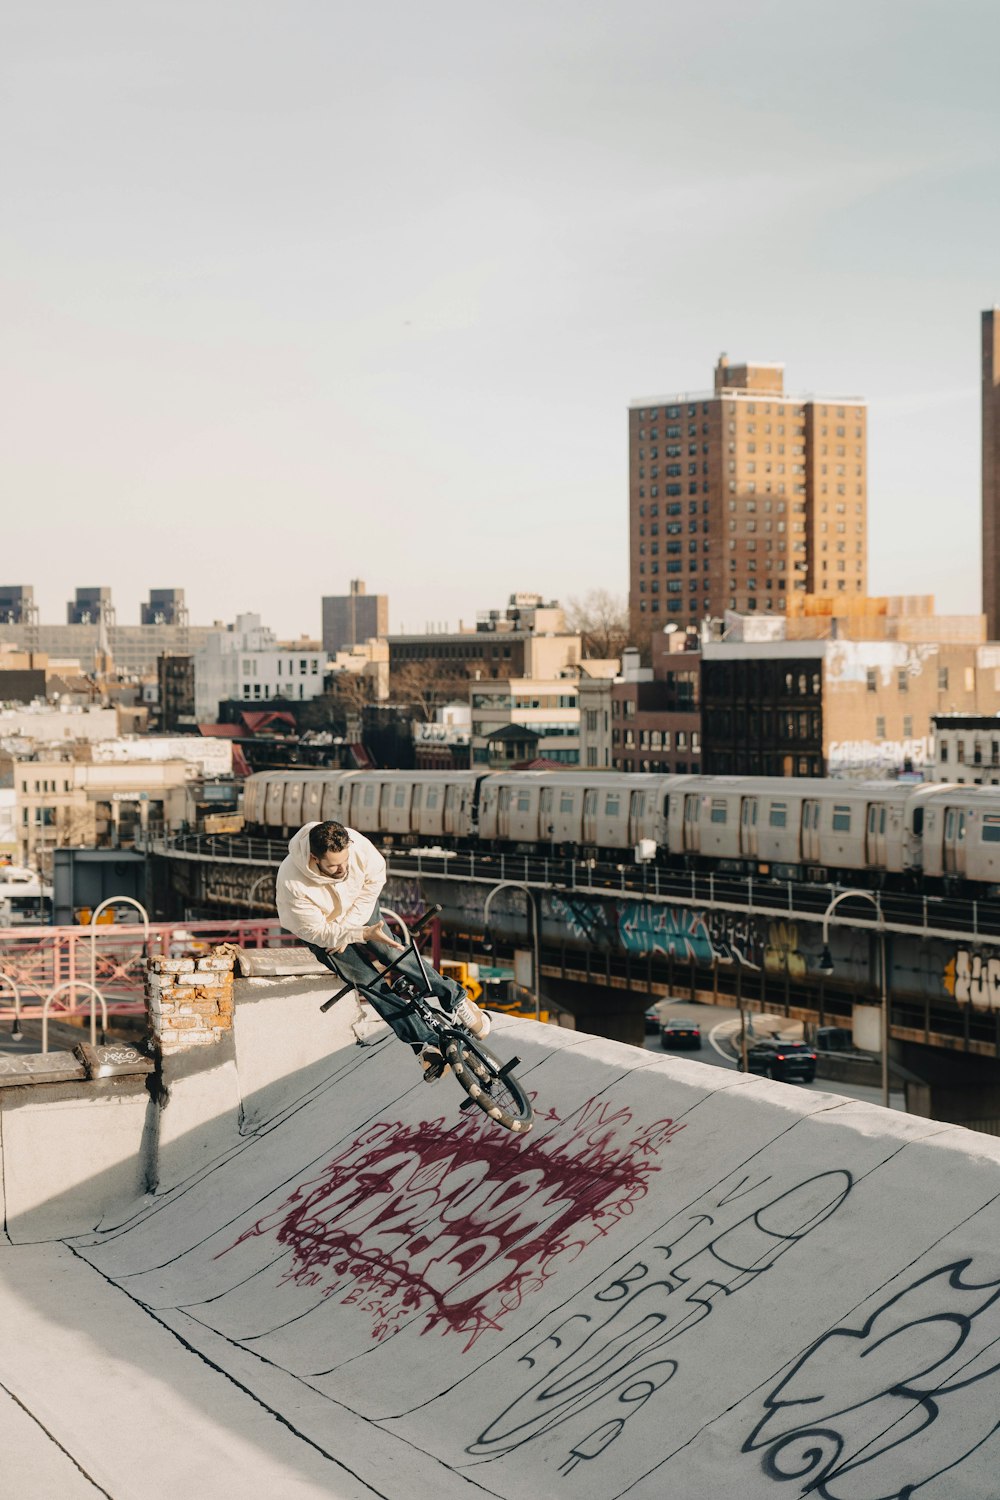 a person riding a bicycle on a roof